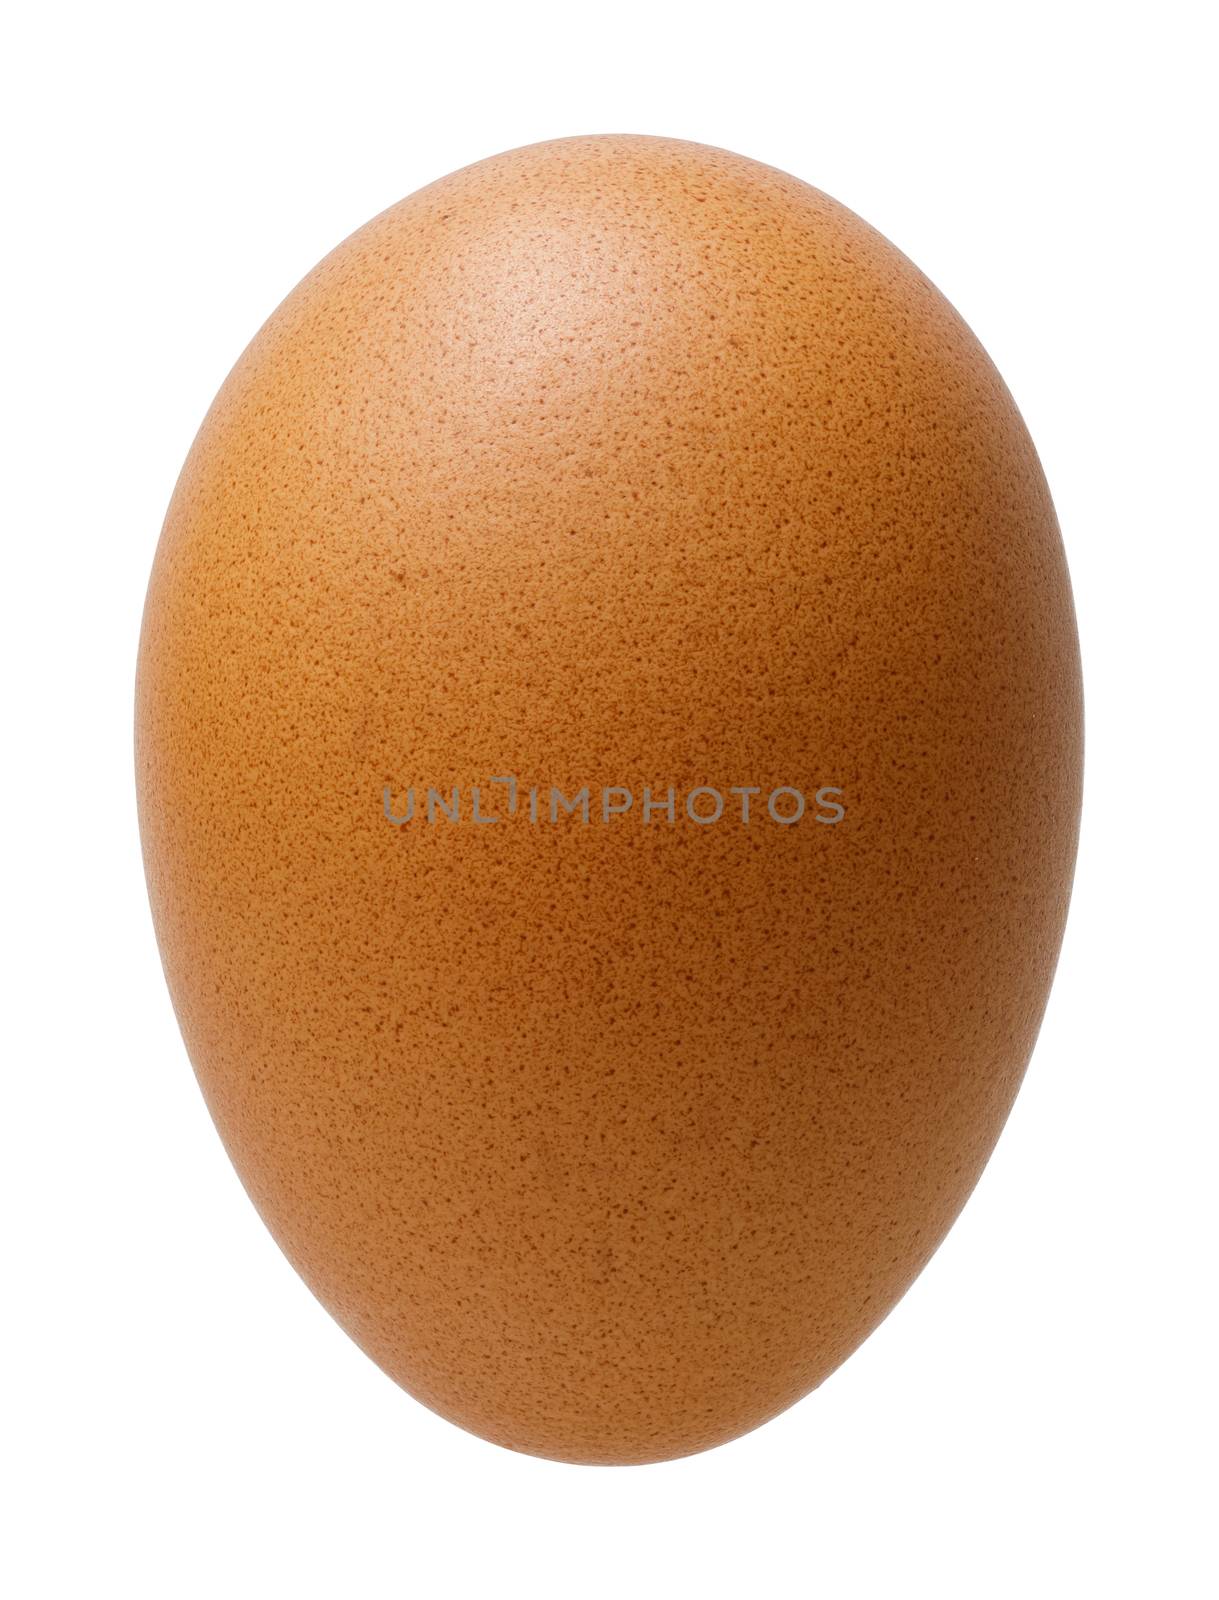 Chicken or hen egg isolated on white backgrund, deep focus stacking image, include pen tool clipping path